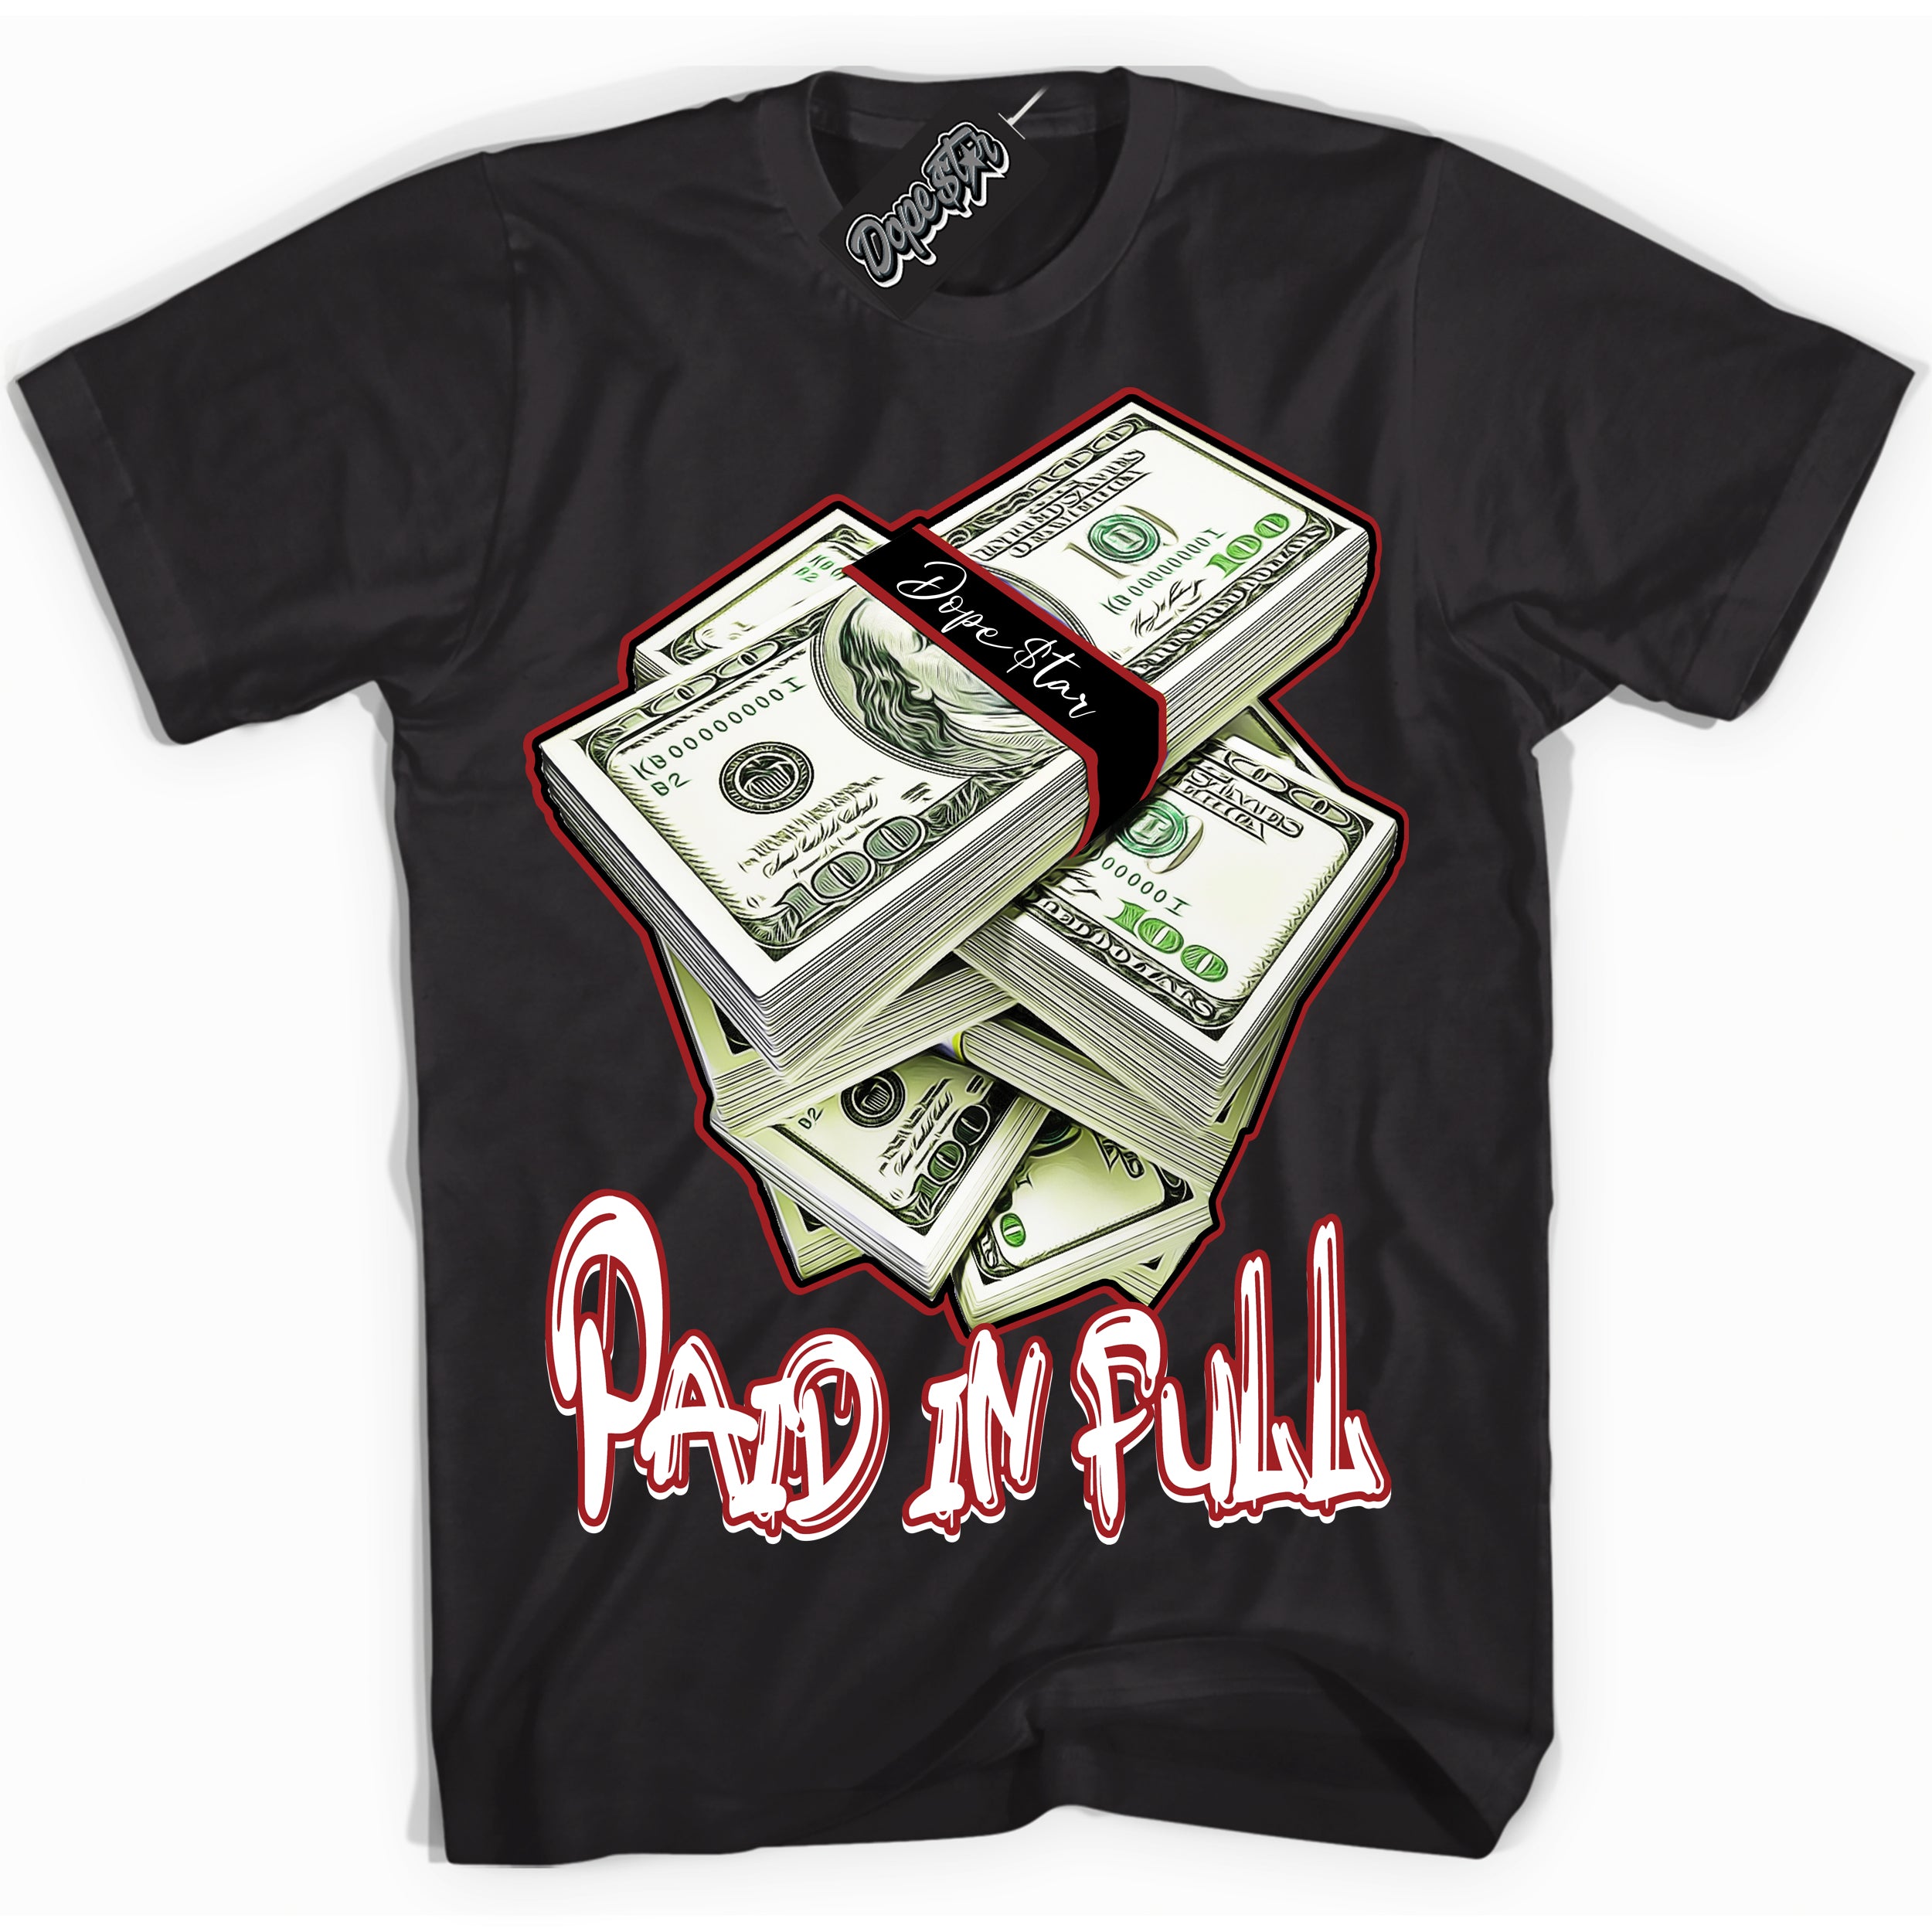 Cool Black graphic tee with “ Paid In Full ” print, that perfectly matches Lost And Found 1s sneakers 